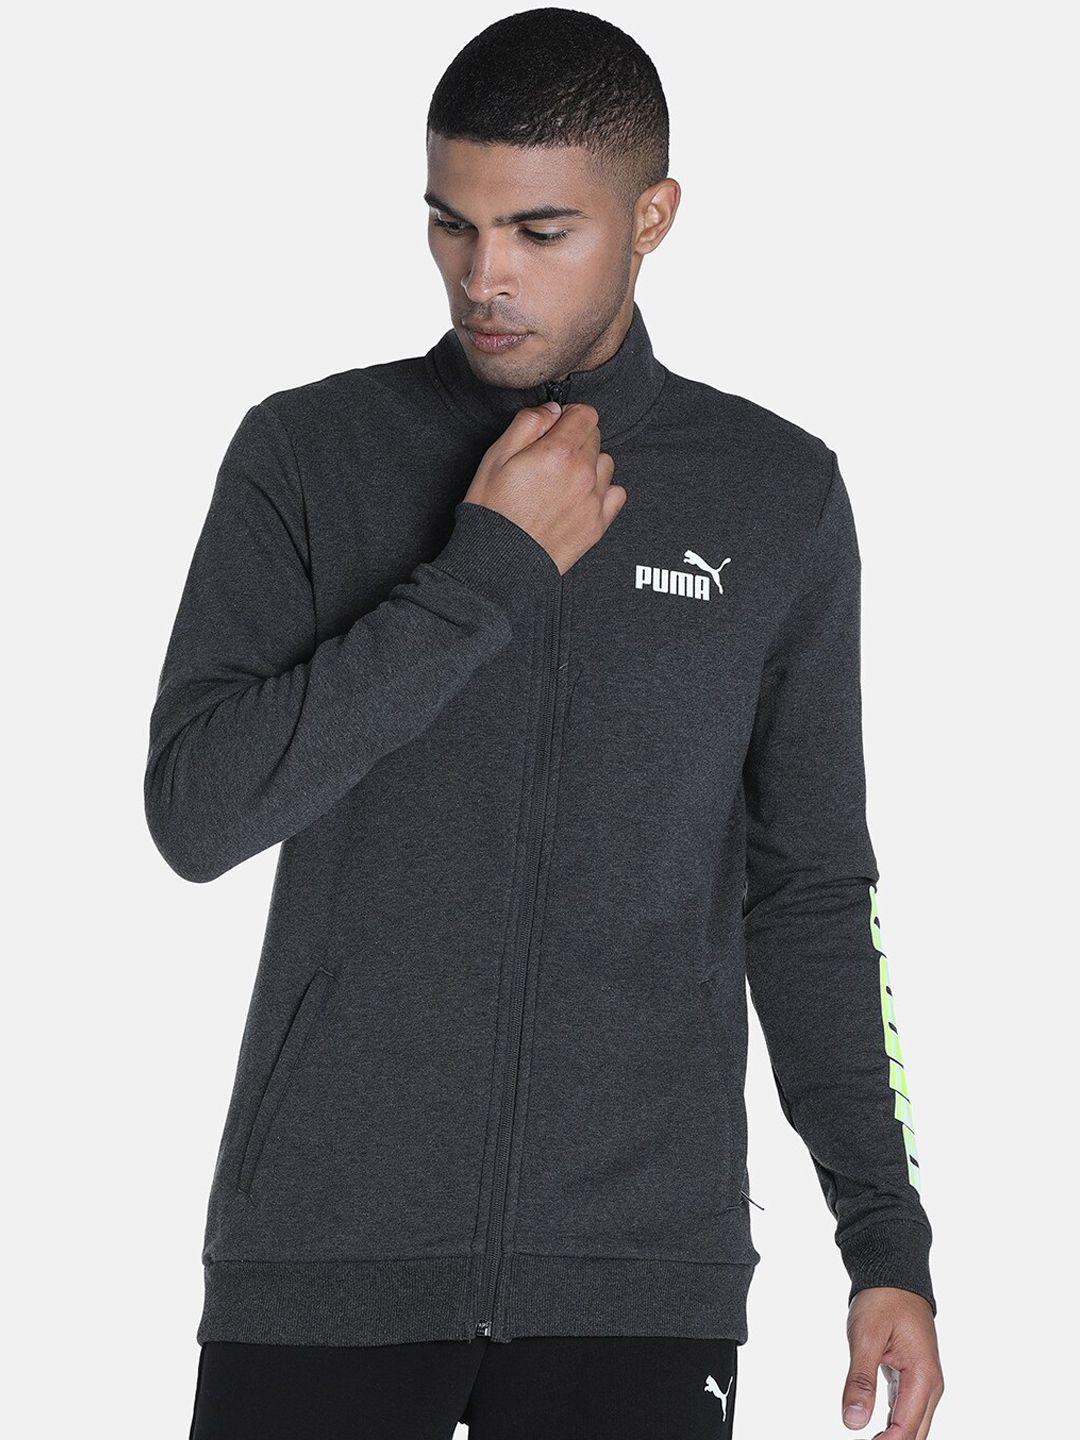 puma men abstract logo knitted cotton sporty jacket